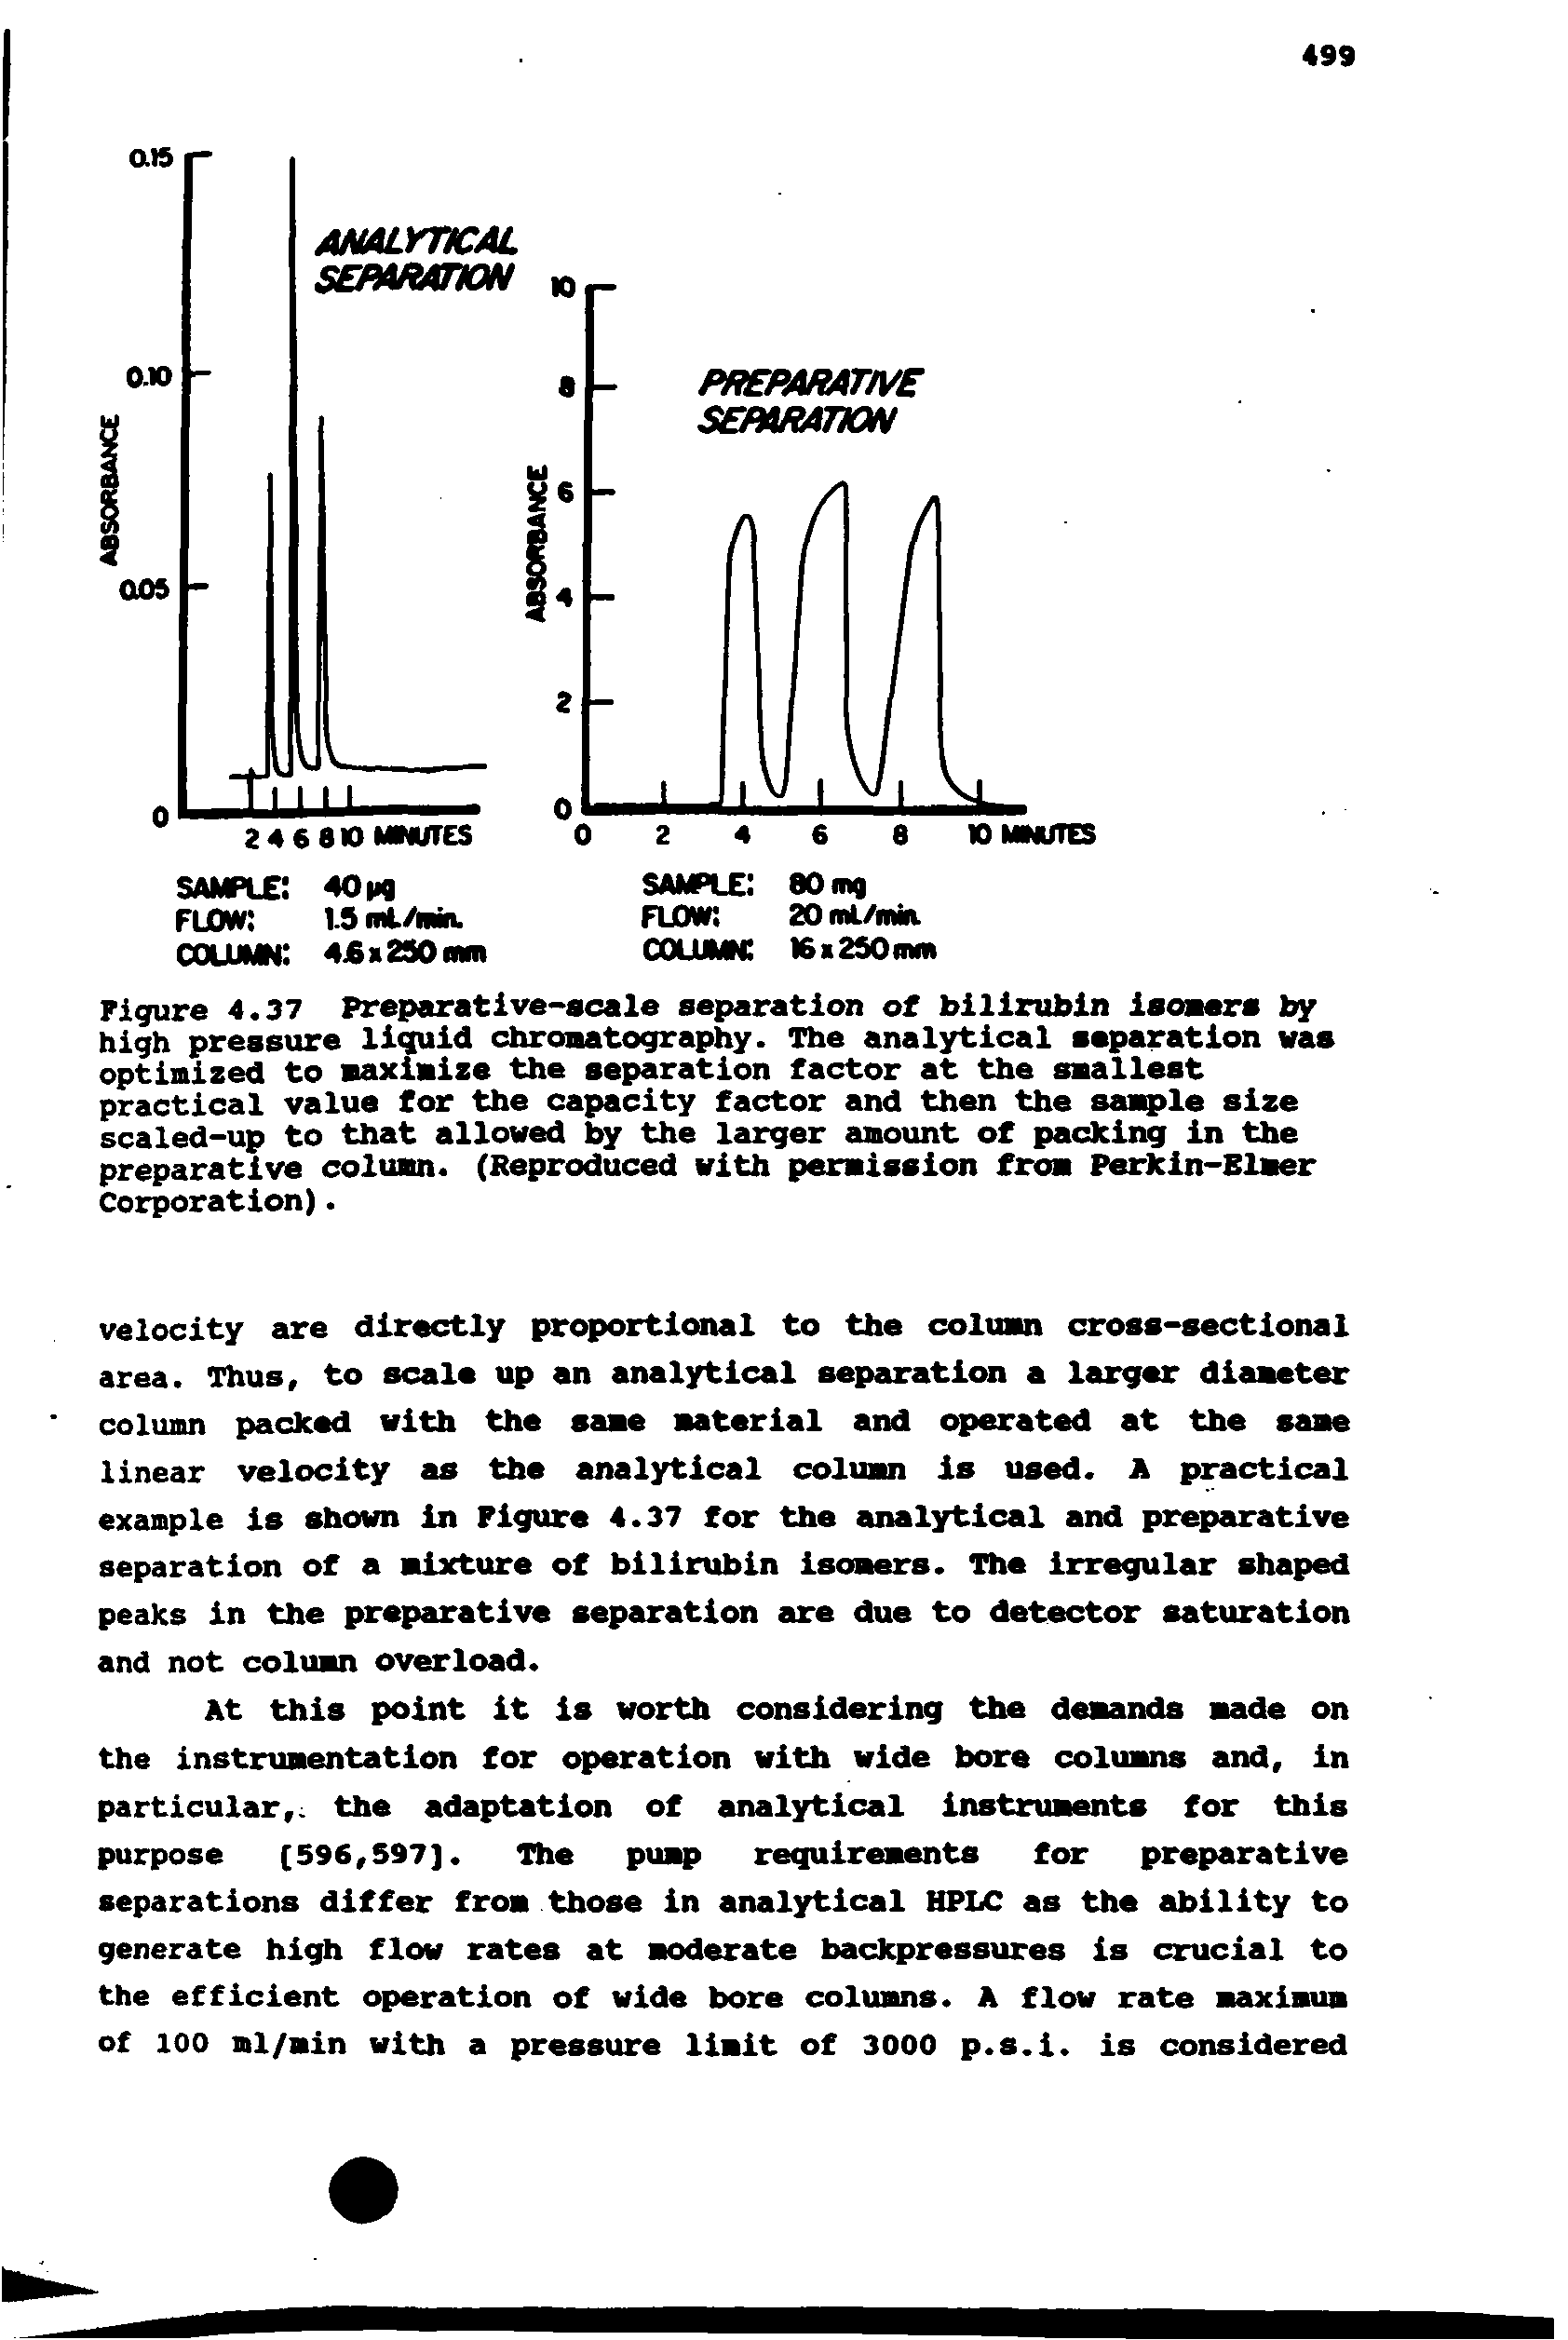 Figure 4.37 Preparative-scale separation of bilirubin laomarm by high pressure liquid chronatography. The analytical separation was optimized to maximize the separation factor at the smallest practical value for the capacity factor and then the saiq>le size scaled-up to that allowed by the larger amount of packing in the preparative column. (Reproduced with permission from Perkin-Elmer Corporation).